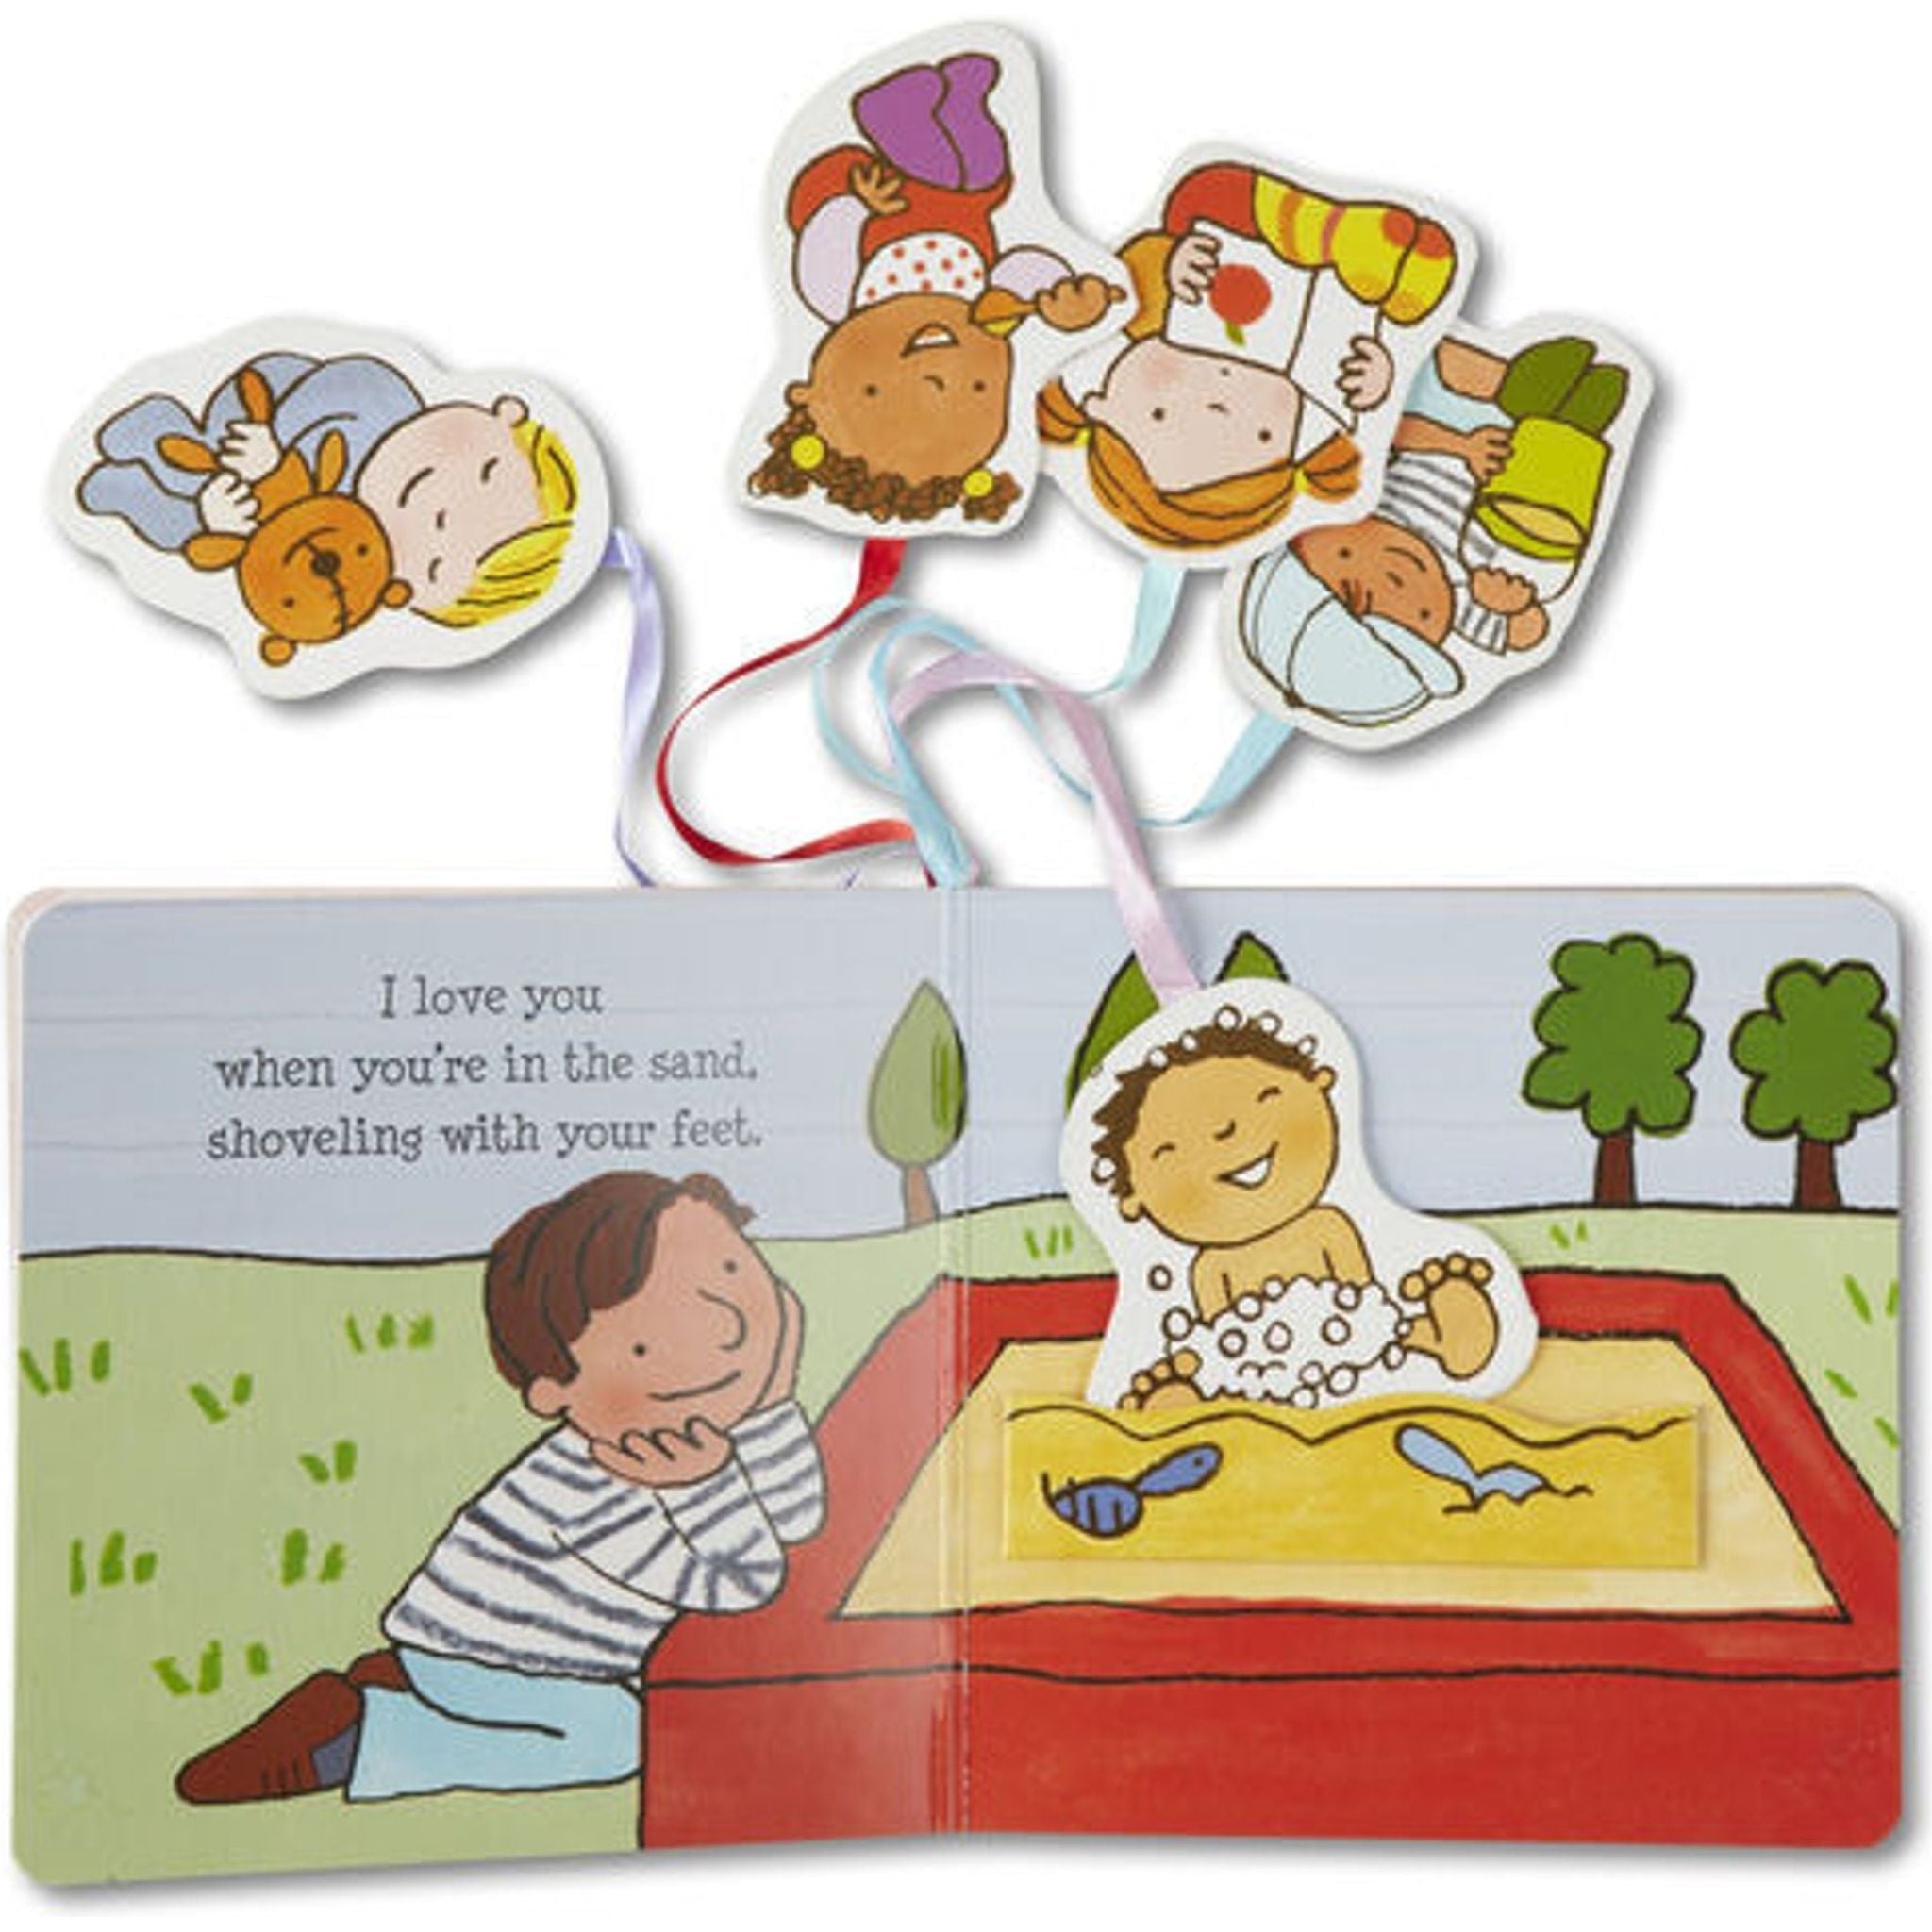 Melissa & Doug - Tether Book - I Love You All Day Long - Toybox Tales